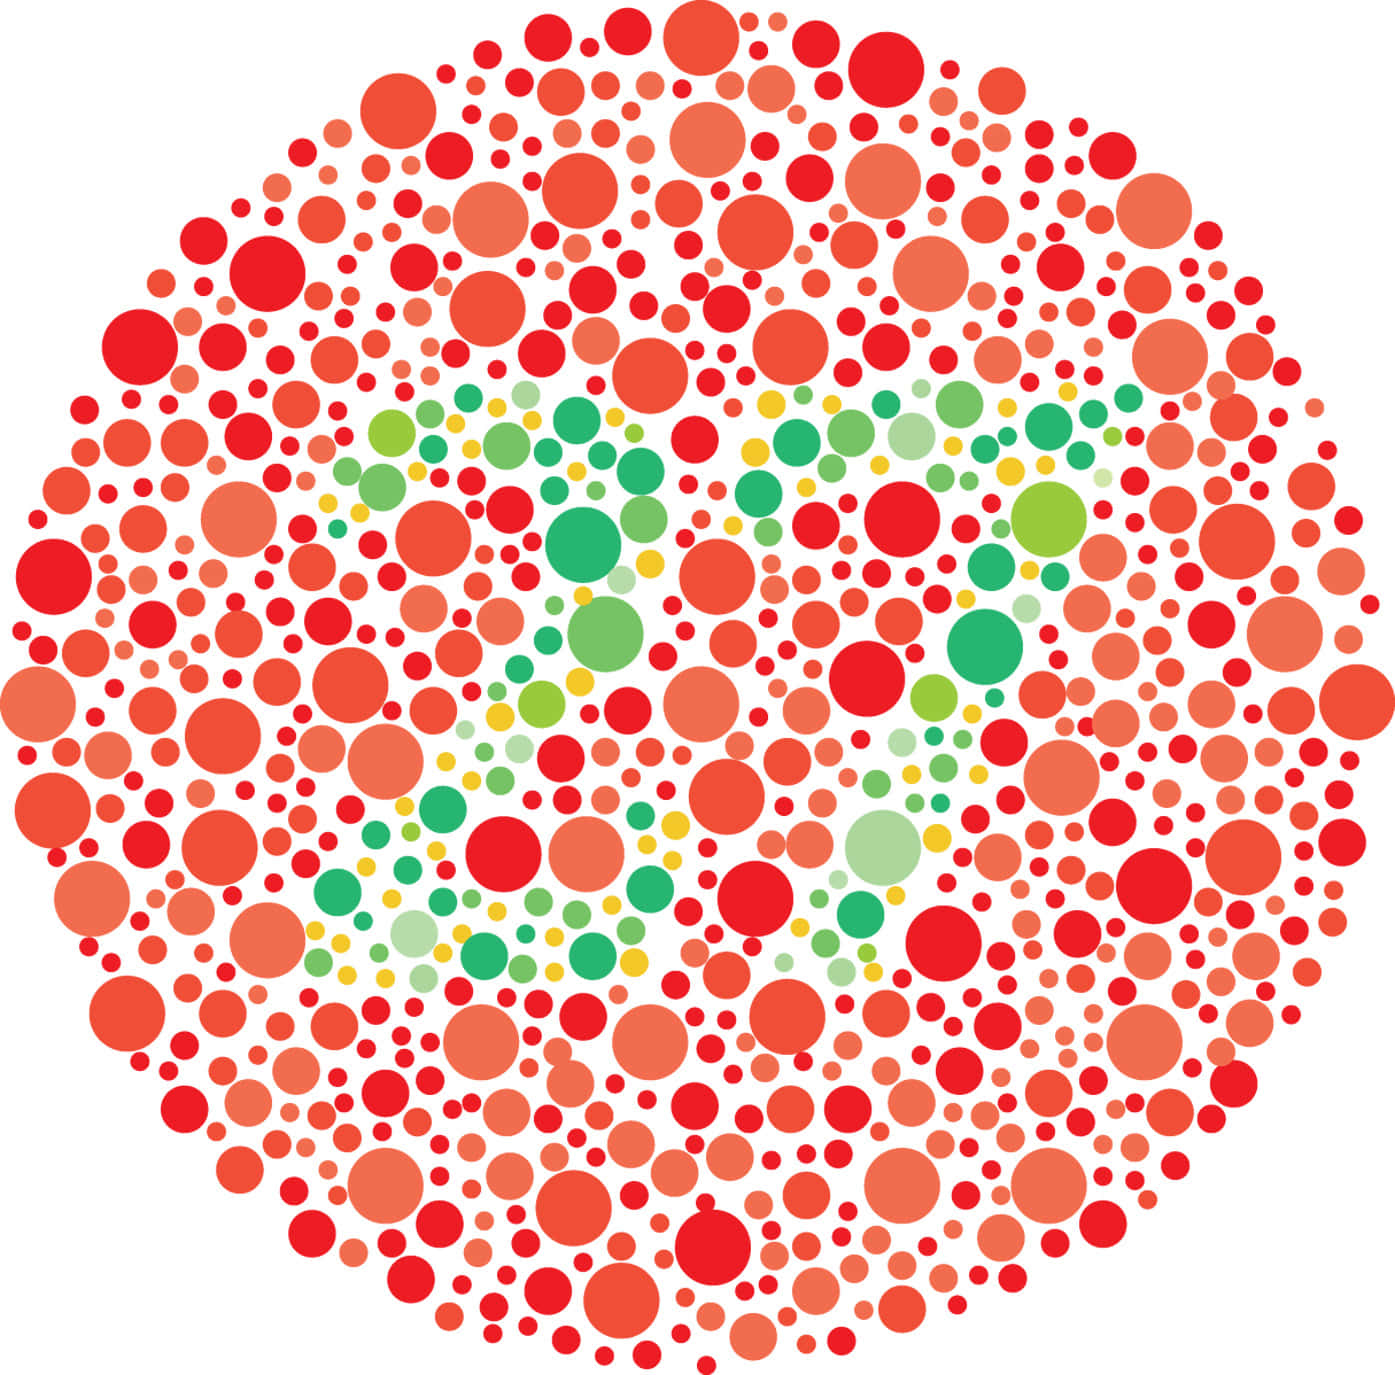 A Red And Green Circle With Dots On It